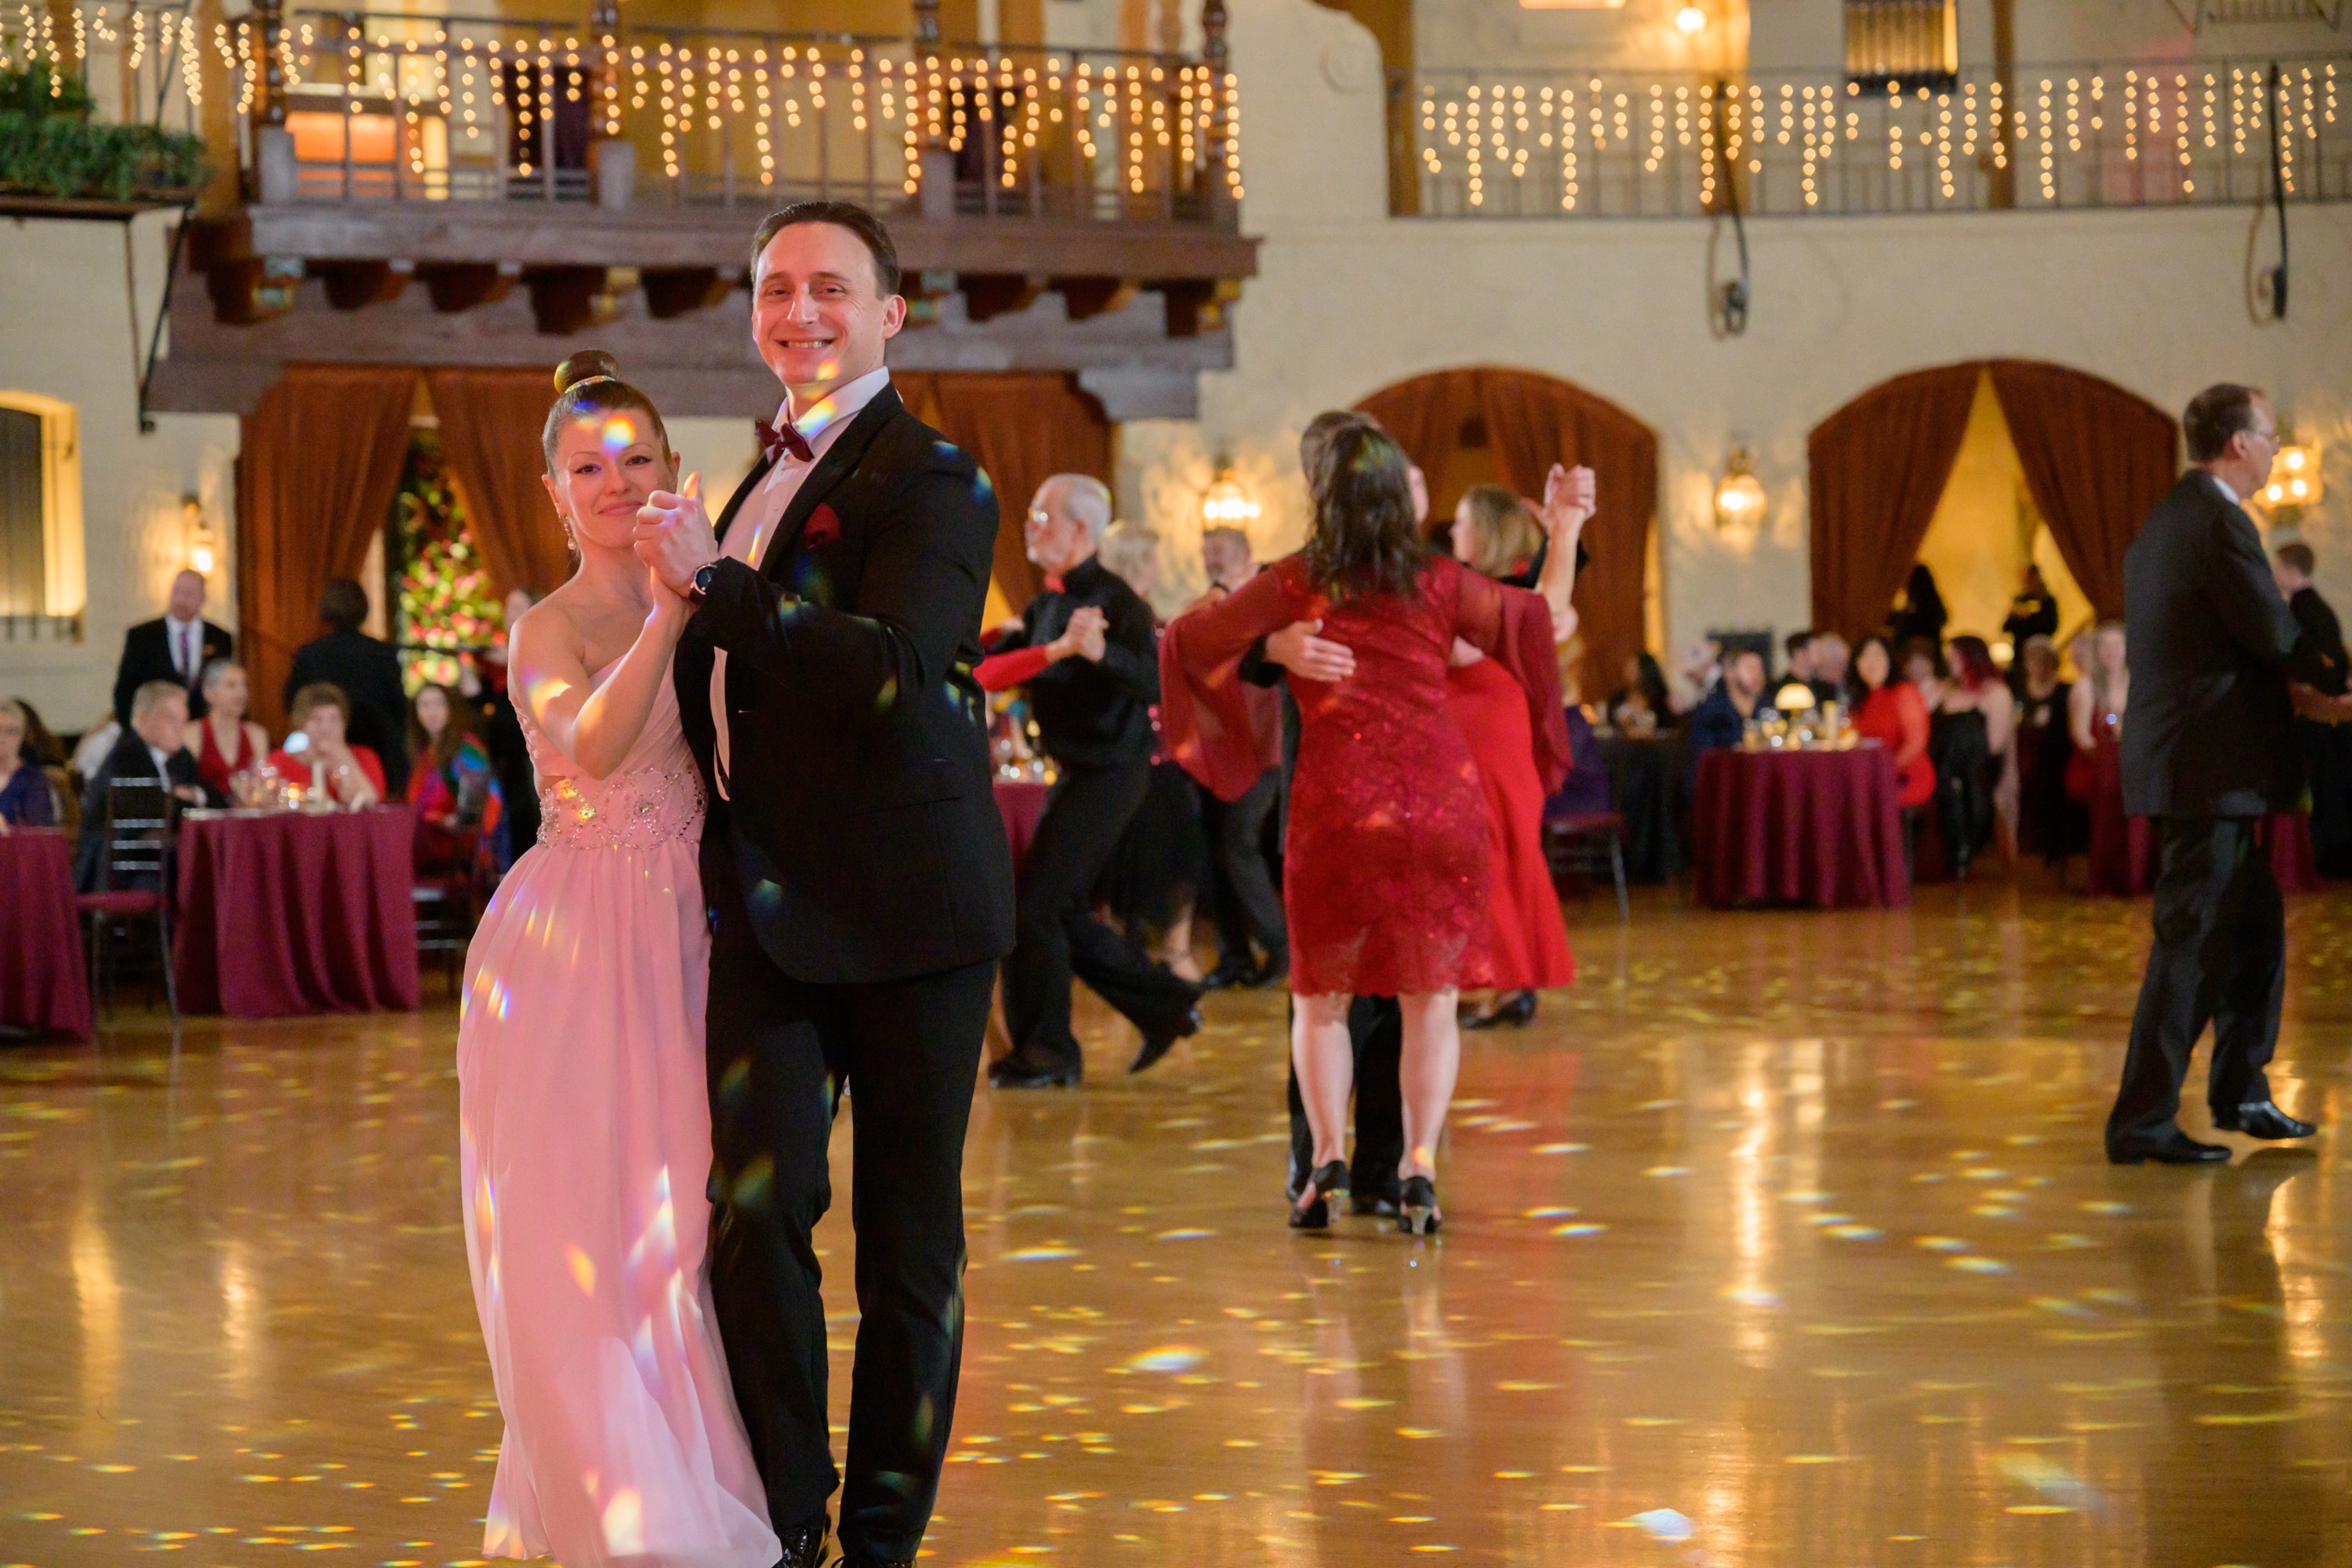 Dancing the Night Away at the Indiana Roof Ballroom in Downtown Indianapolis